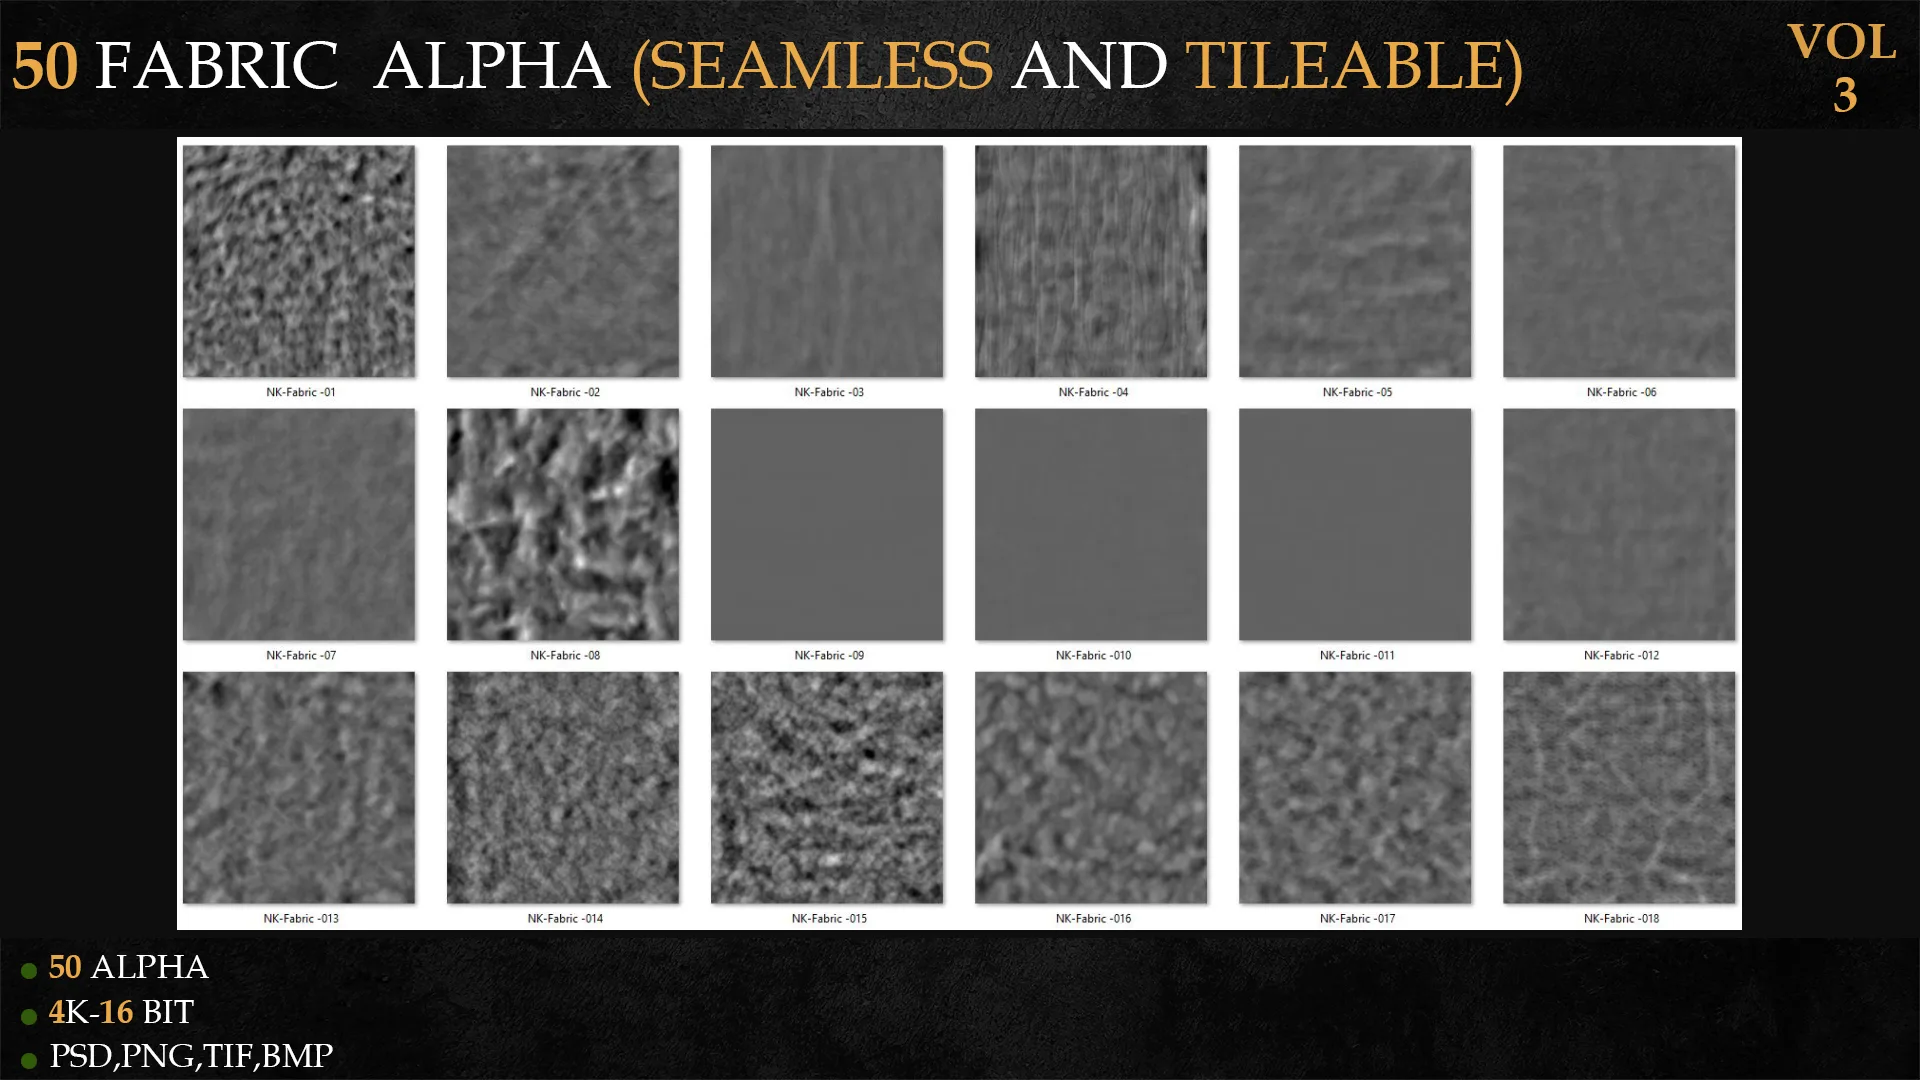 50 FABRIC ALPHA (SEAMLESS AND TILEABLE)-VOL 3